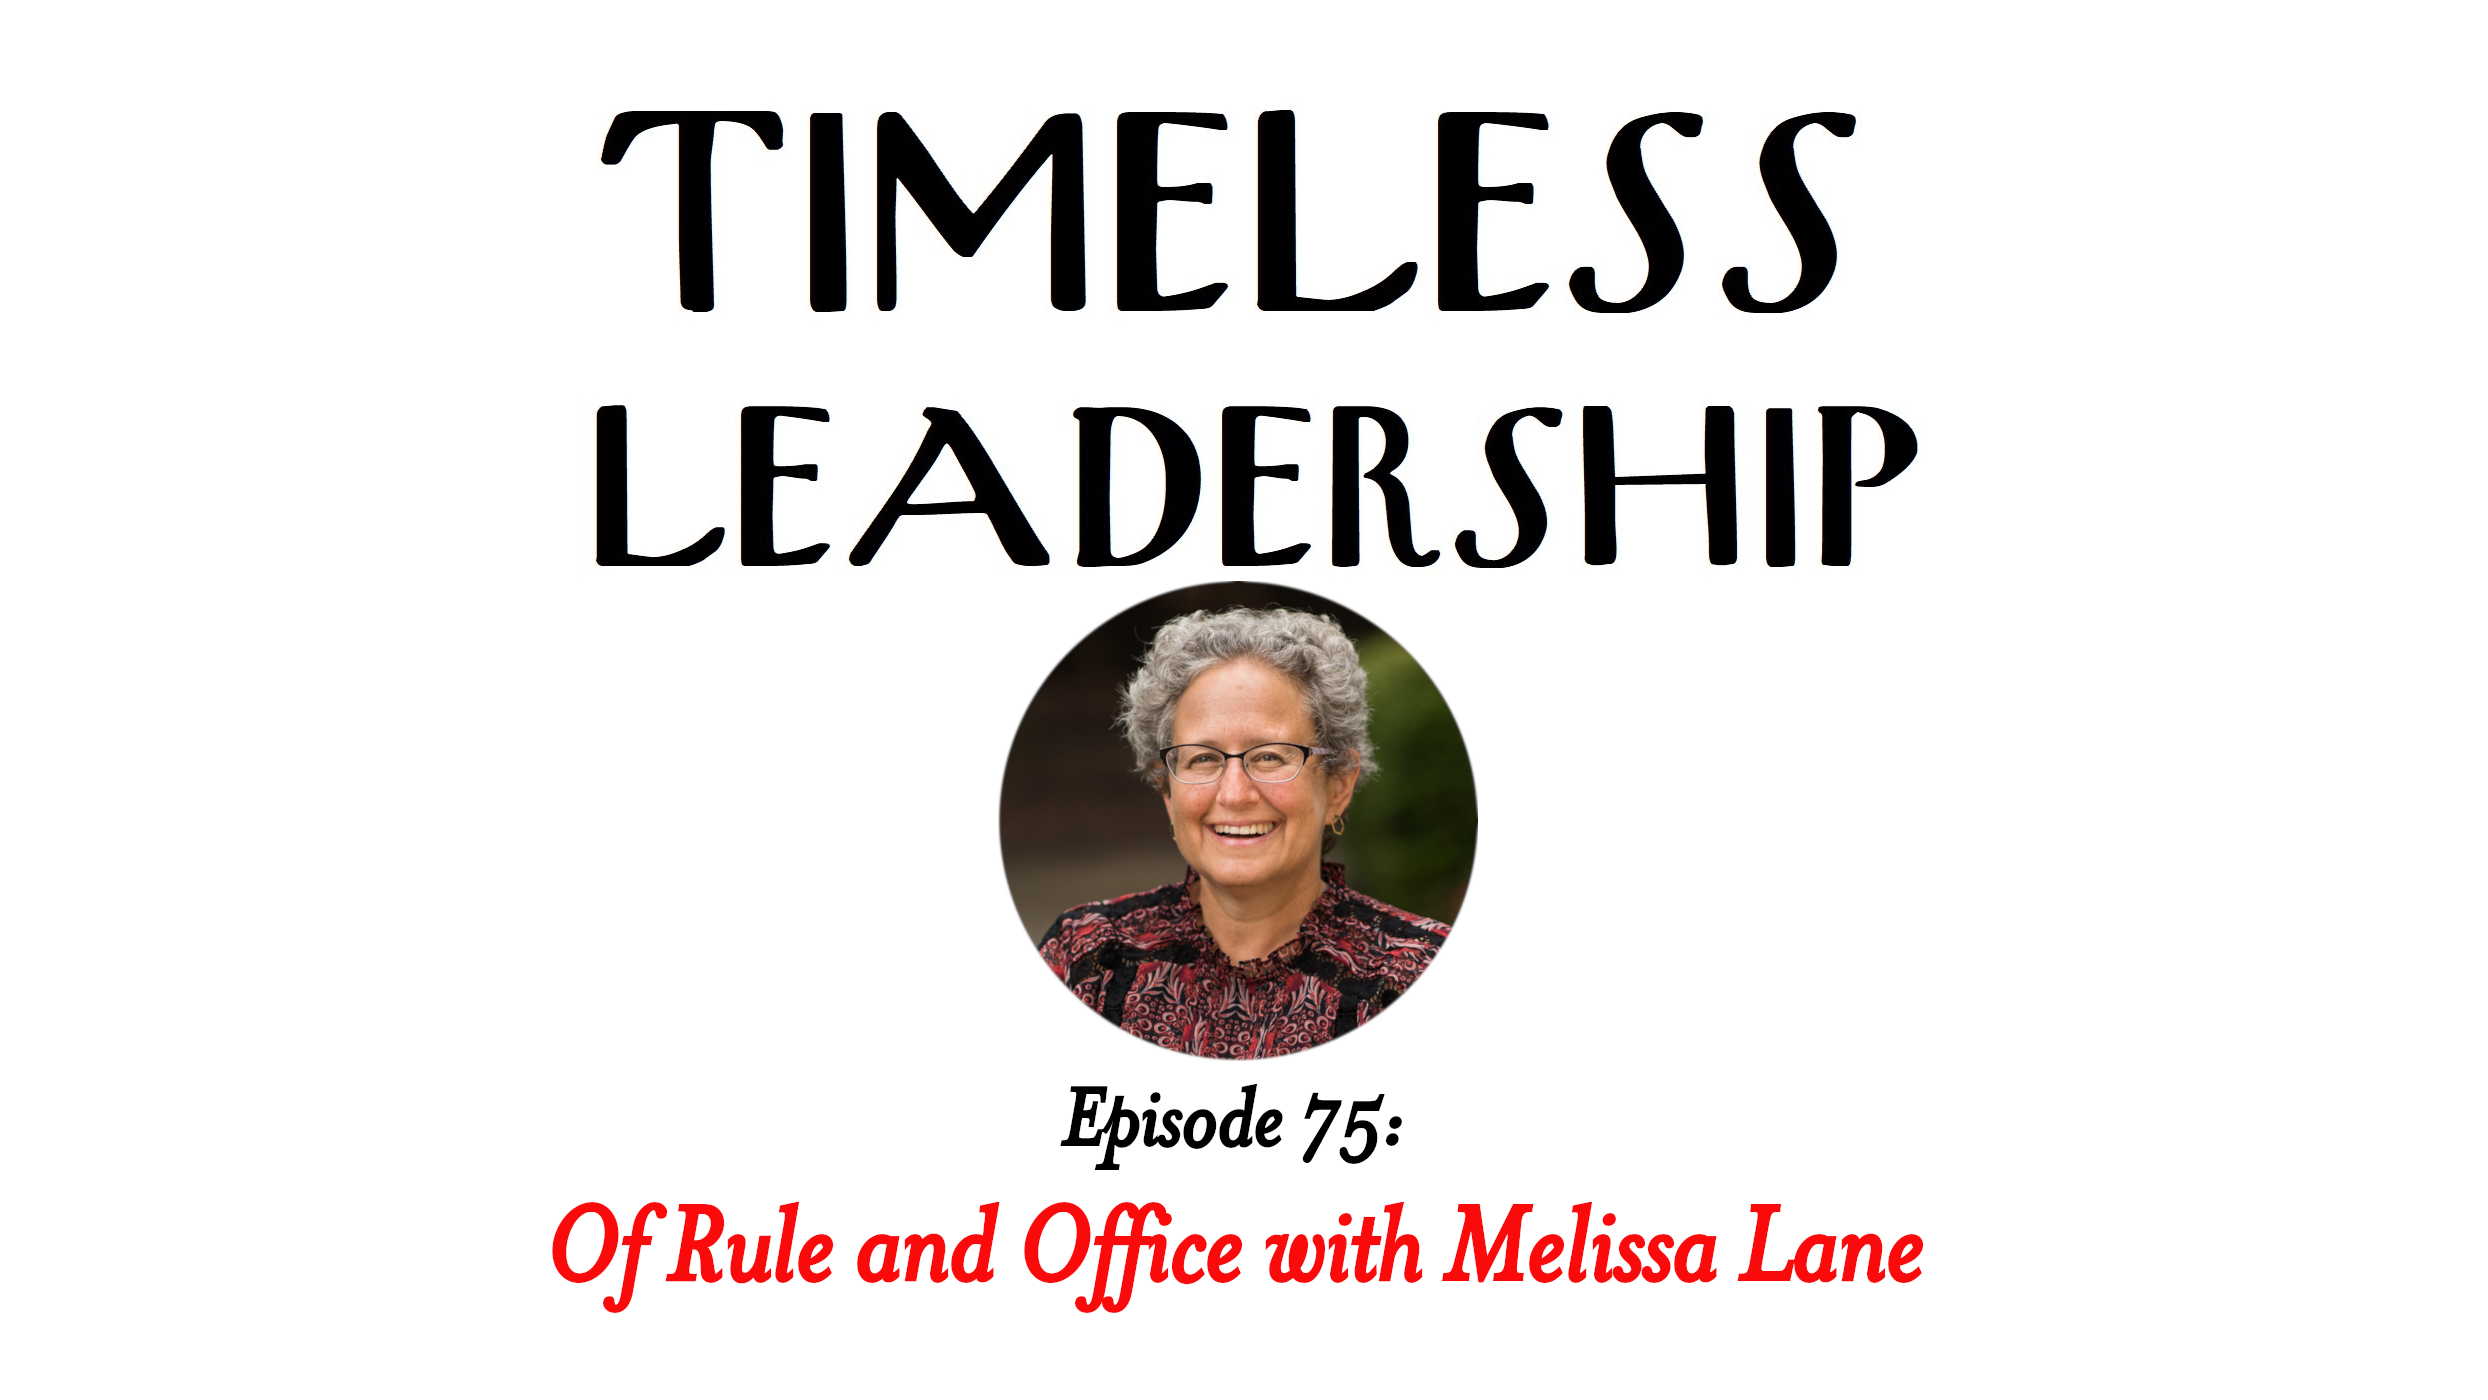 Episode 75: Of Rule and Office with Melissa Lane